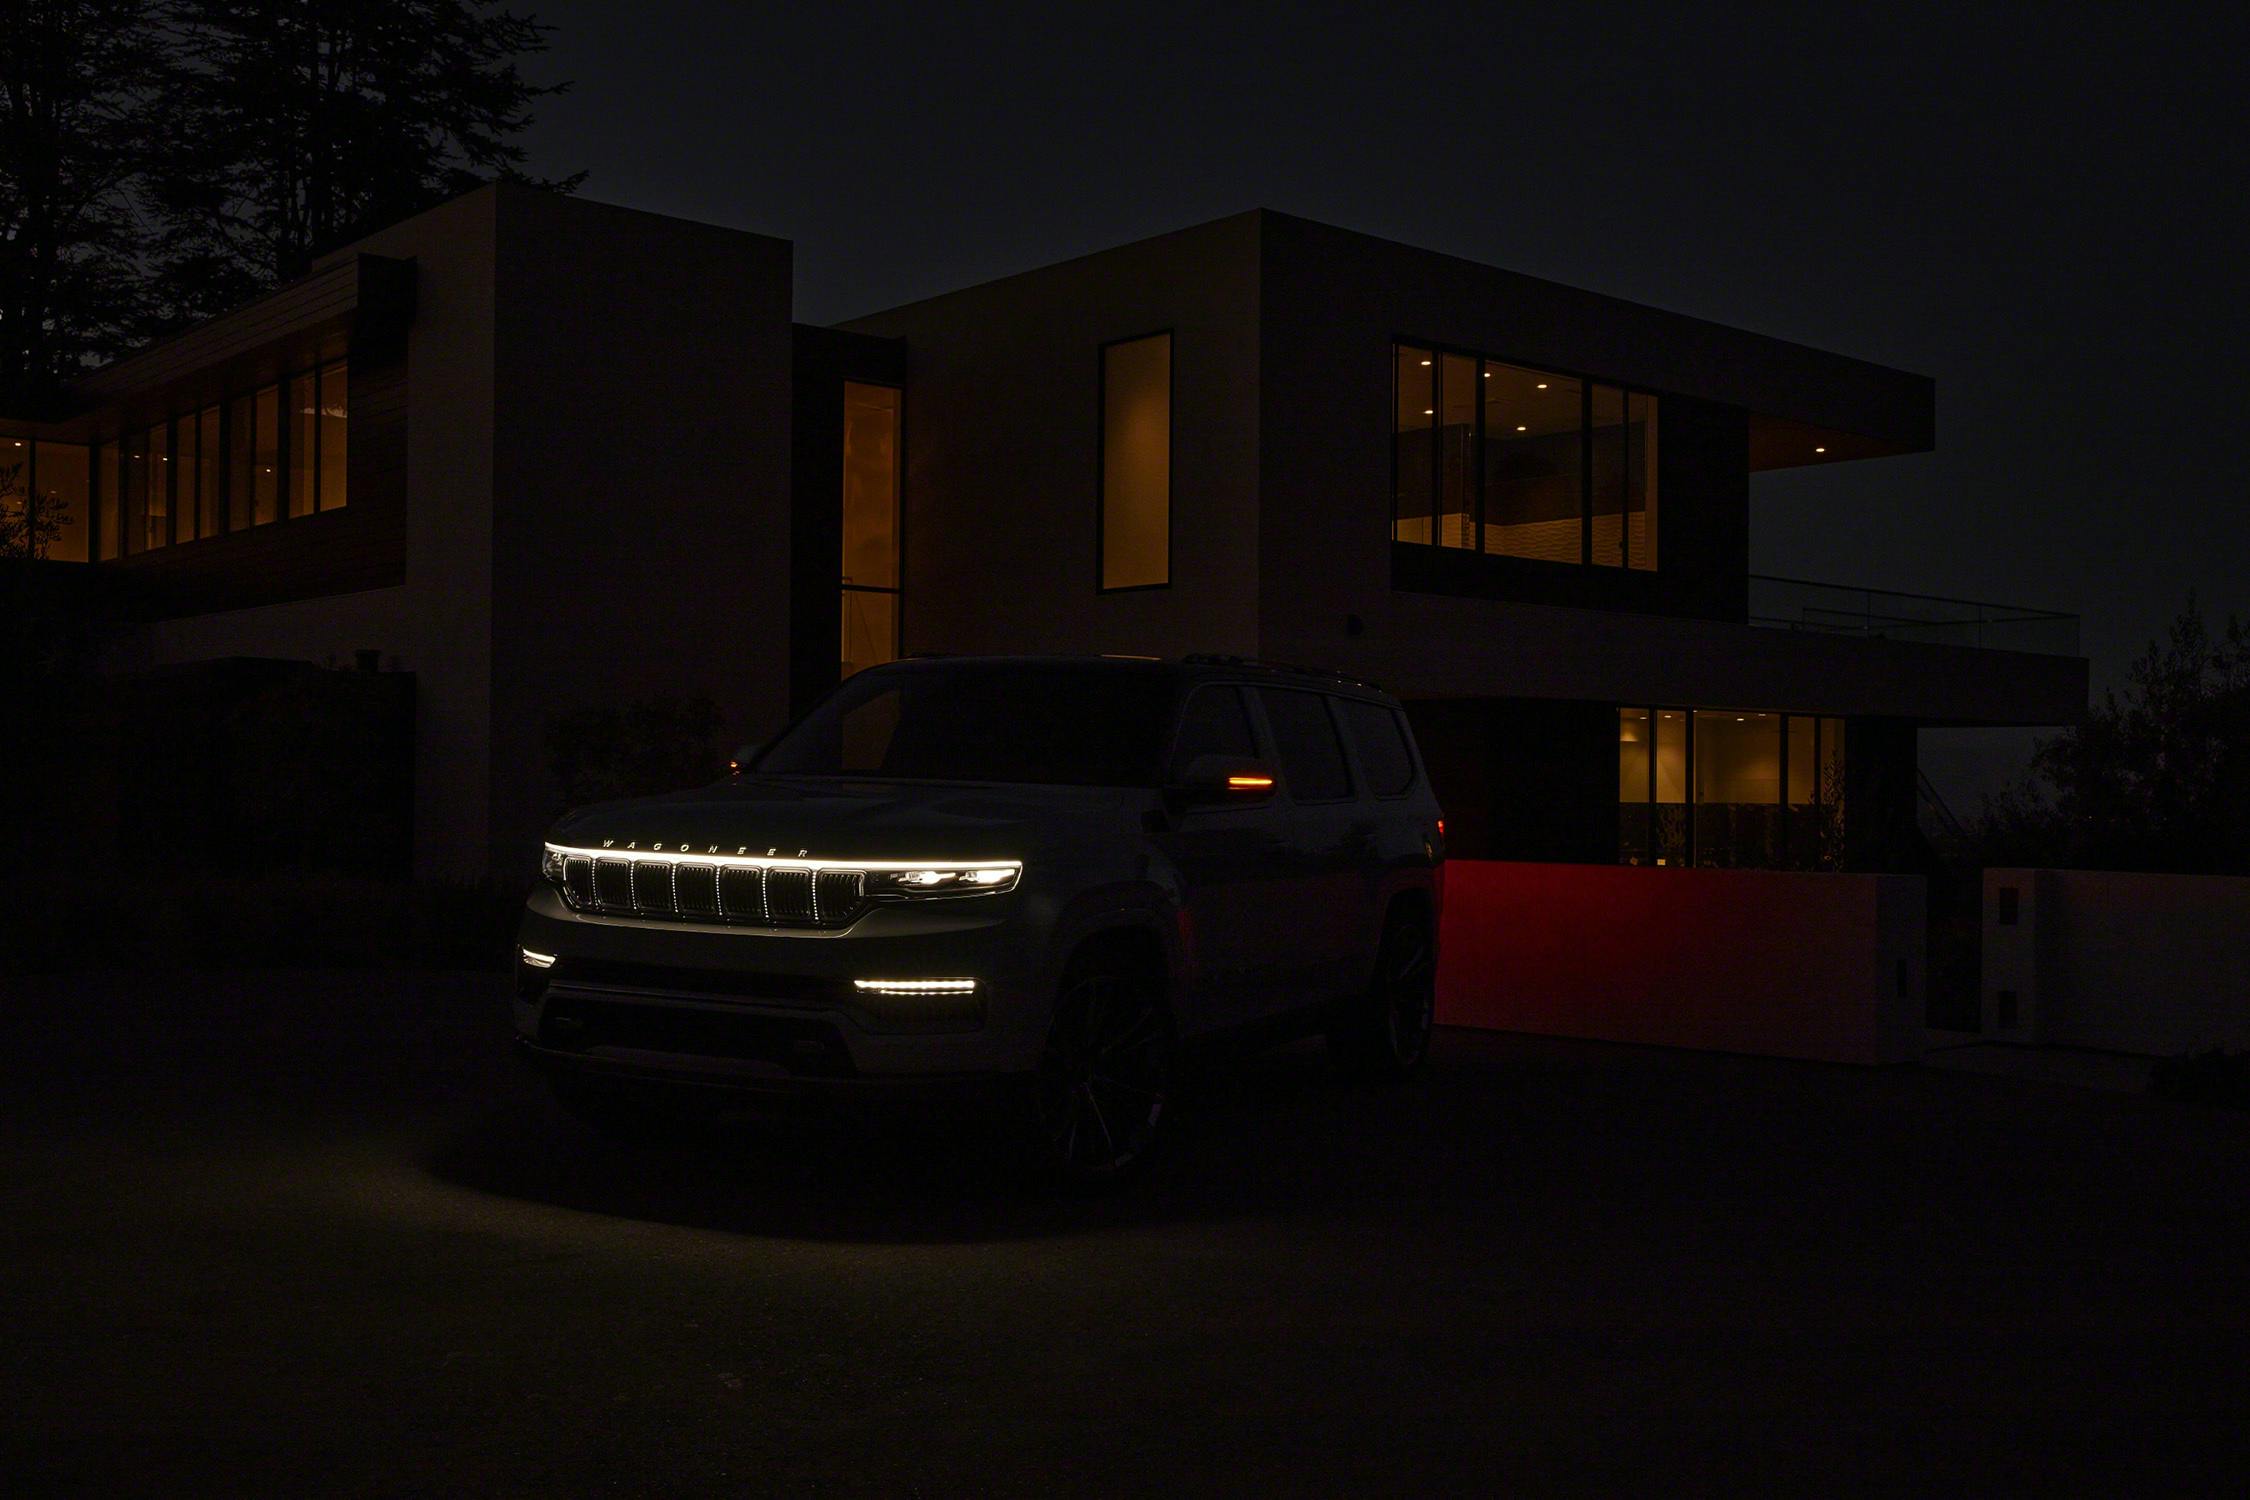 Grand Wagoneer Concept front lighting elements in dark in front of house